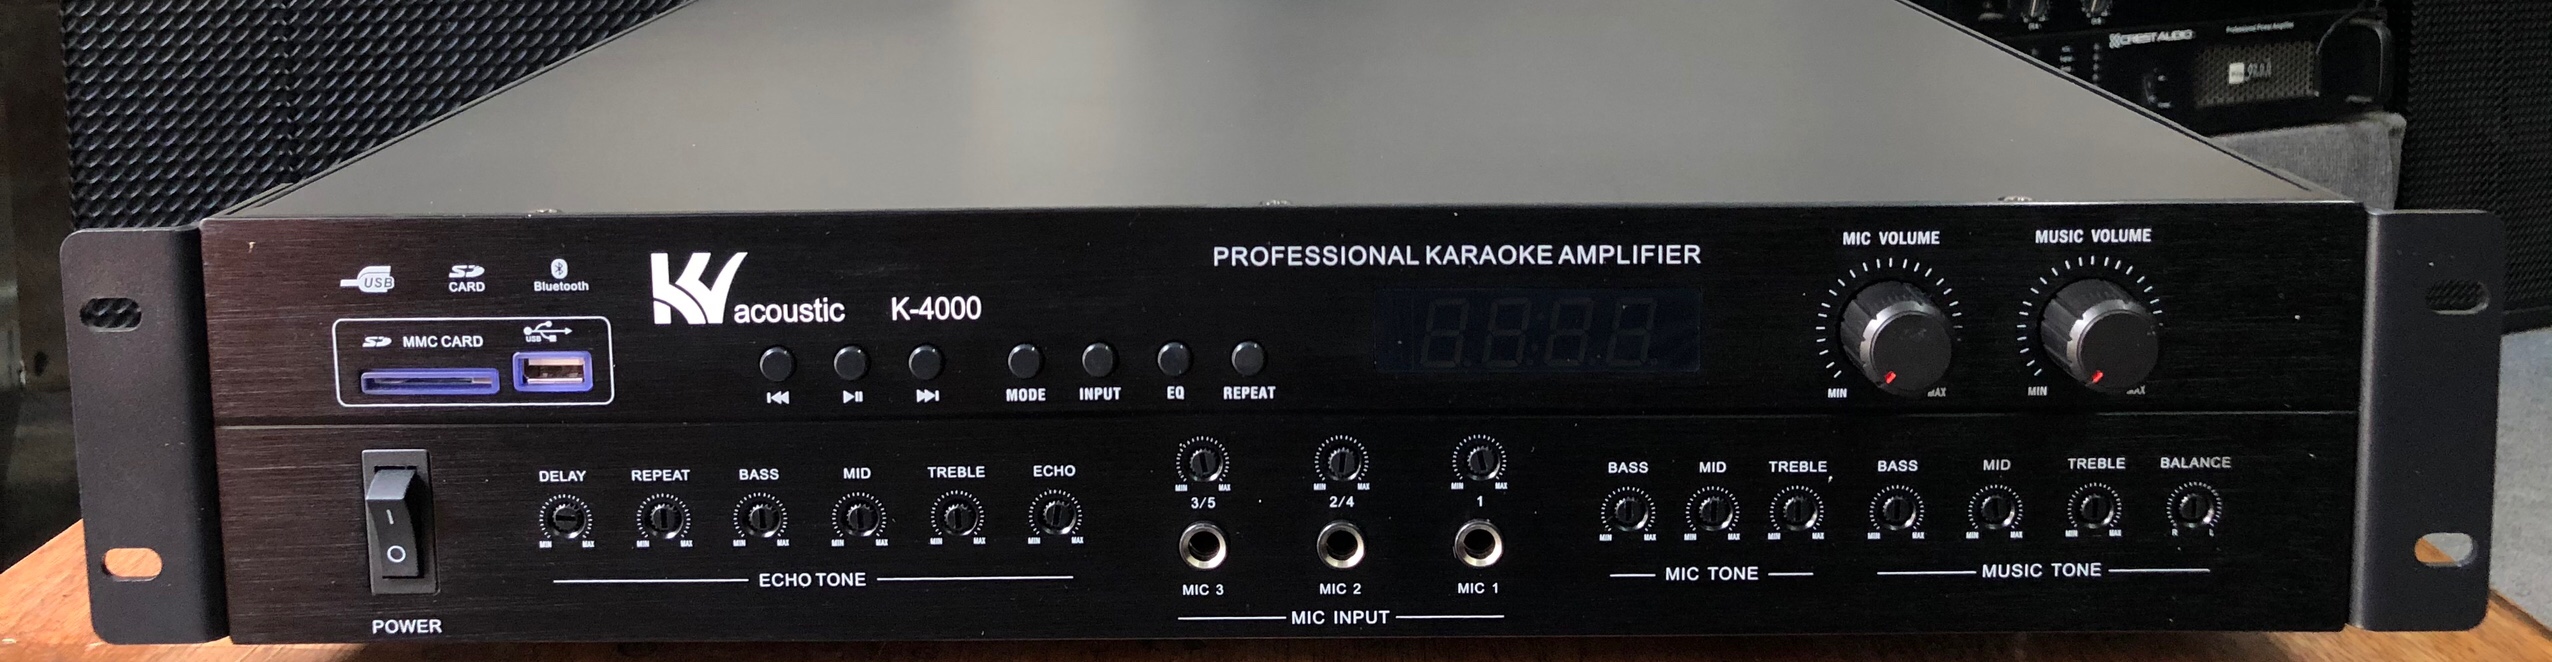 Amply KVacoustic K4000